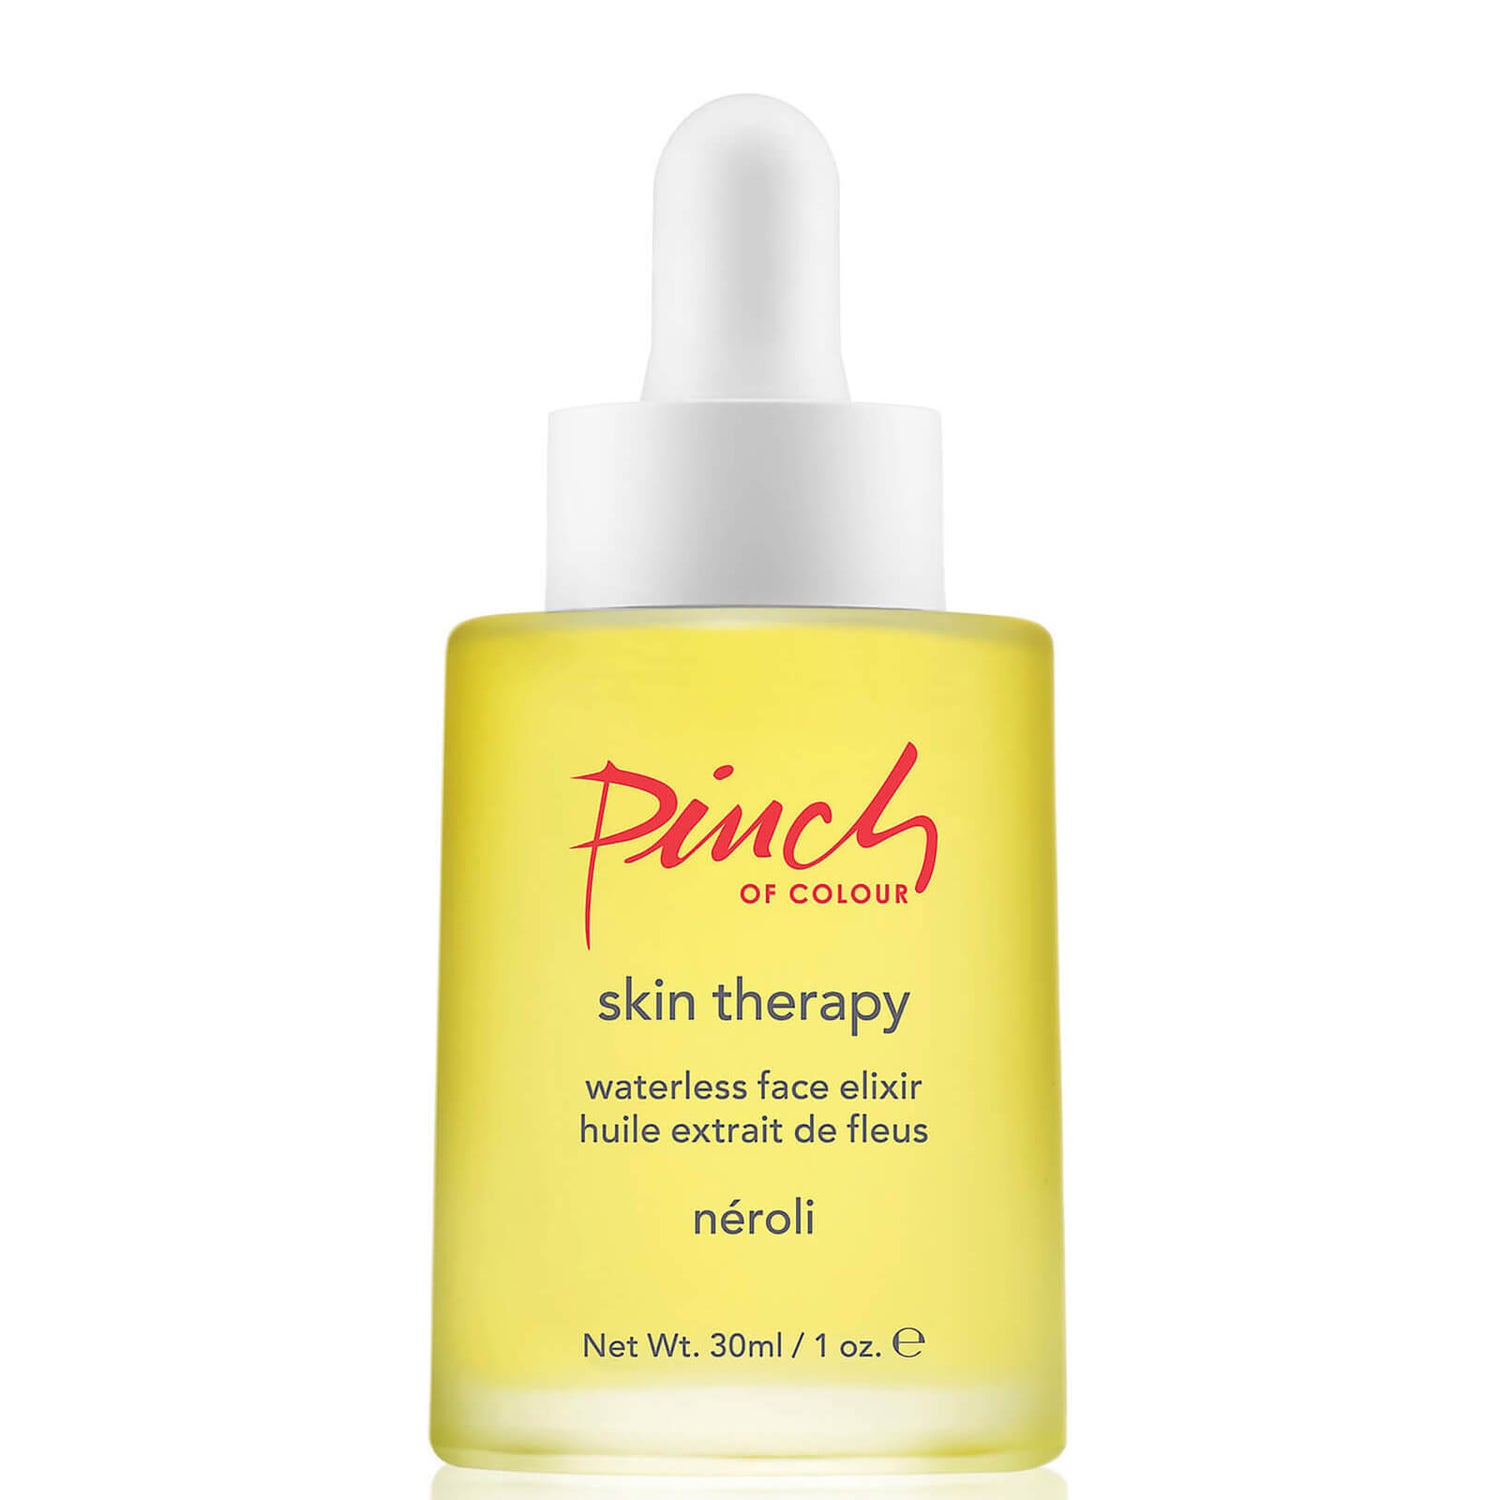 Pinch of Colour Skin Therapy Waterless Face Elixir